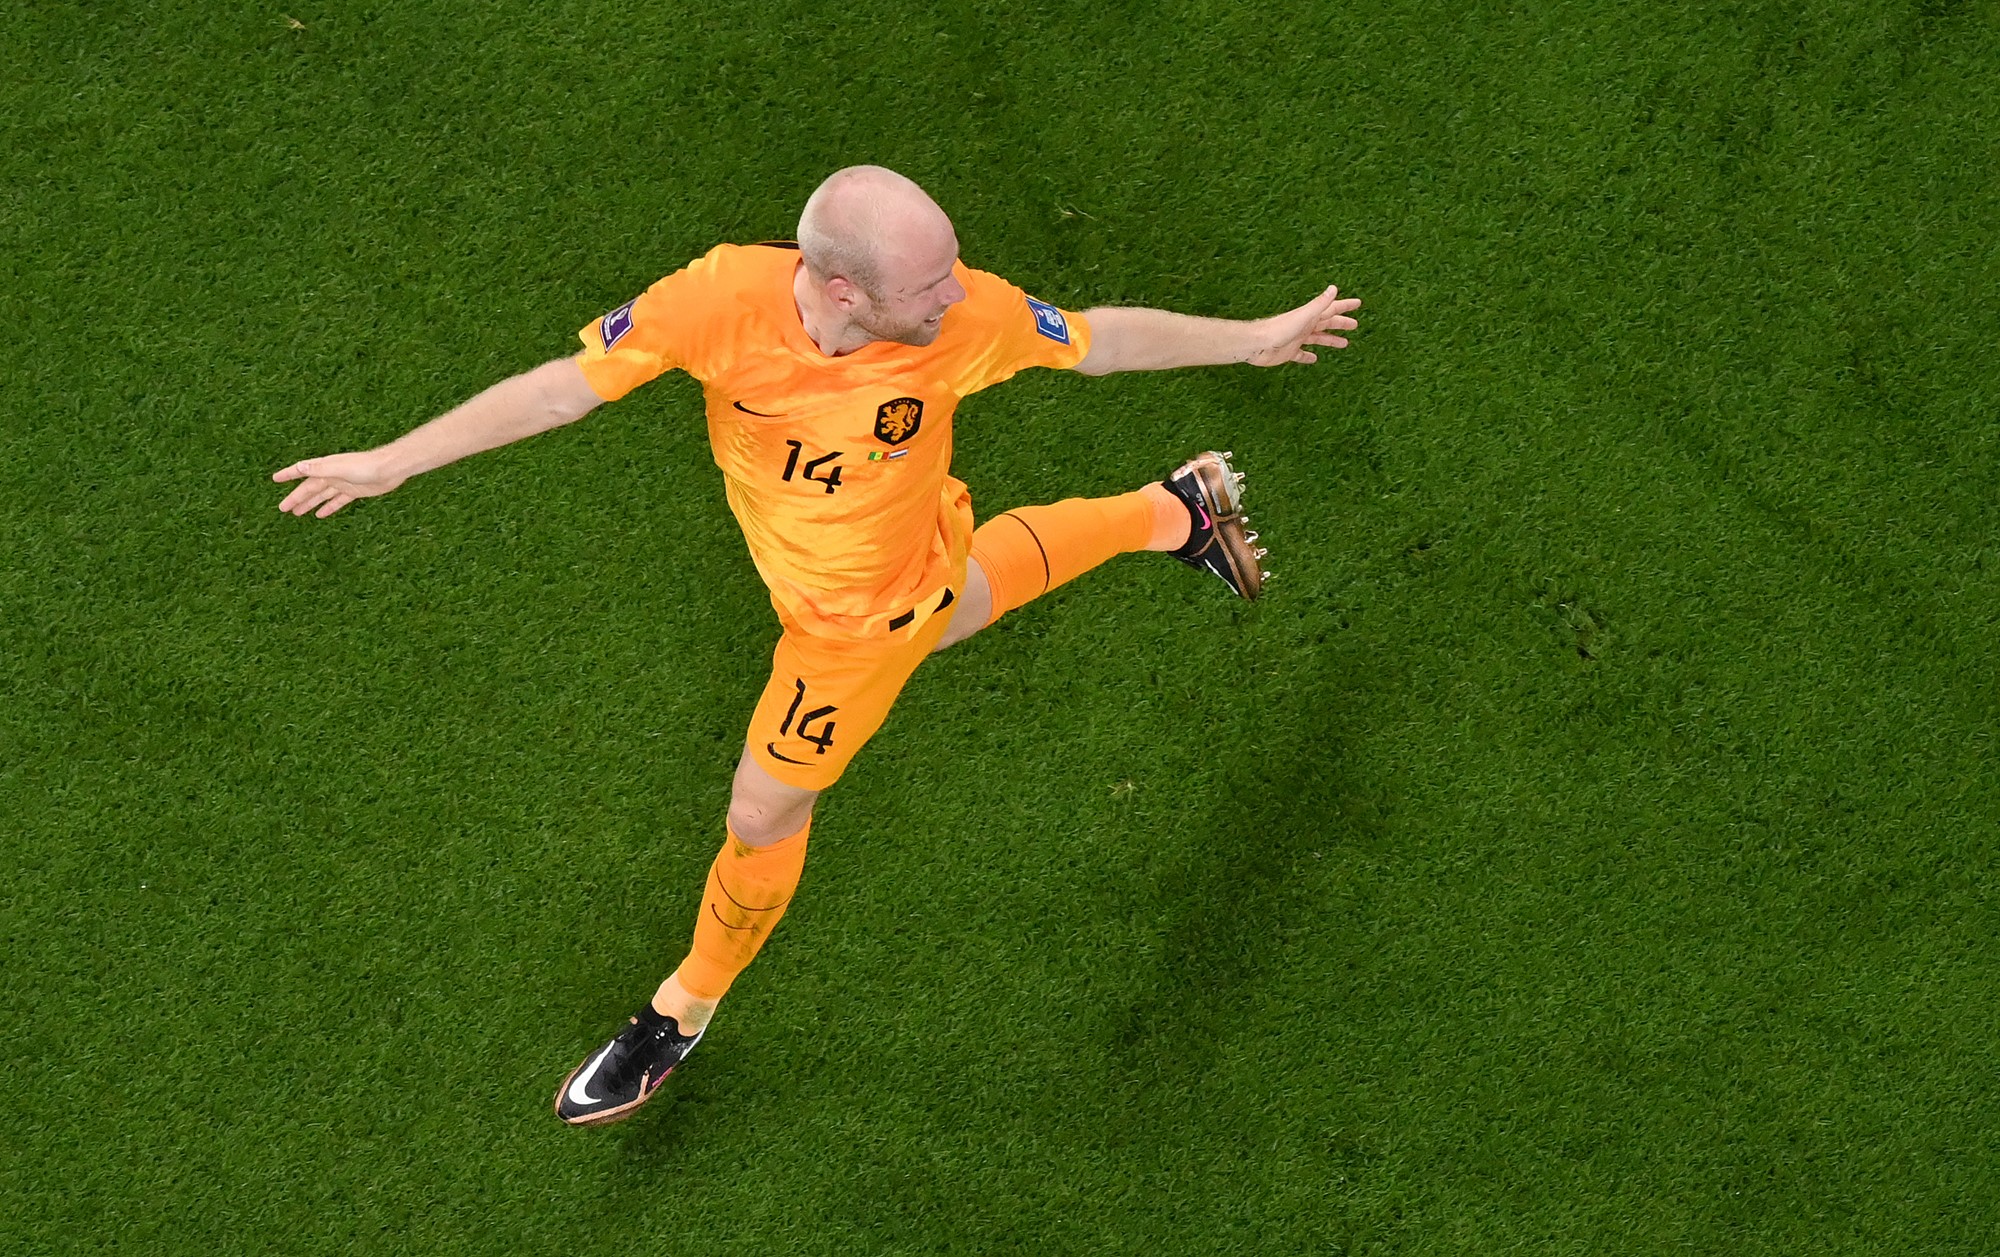 Dutch player viewed from above celebrating with arms spread